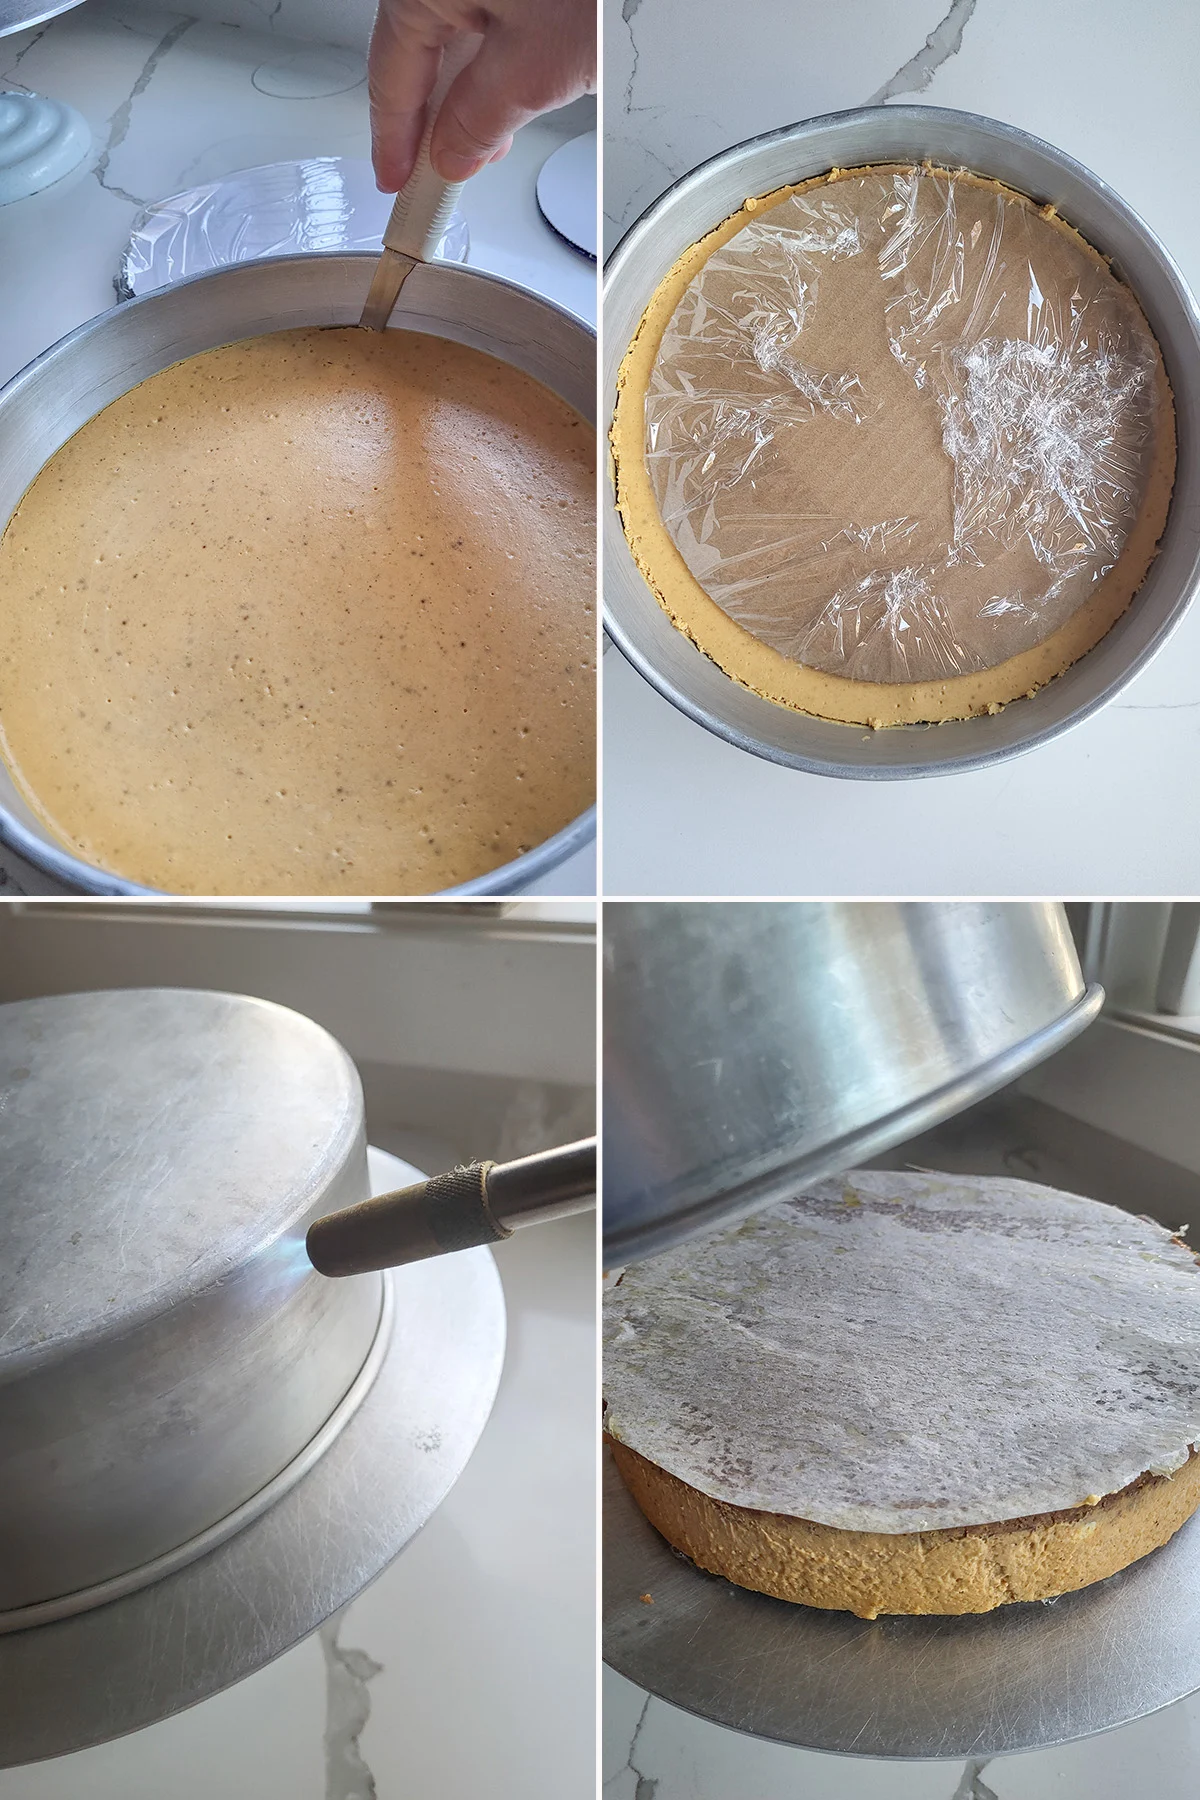 A cheesecake in a pan with cardboard circle on top. A blowtorch warming a cake pan. A cheesecake coming out of a cake pan.